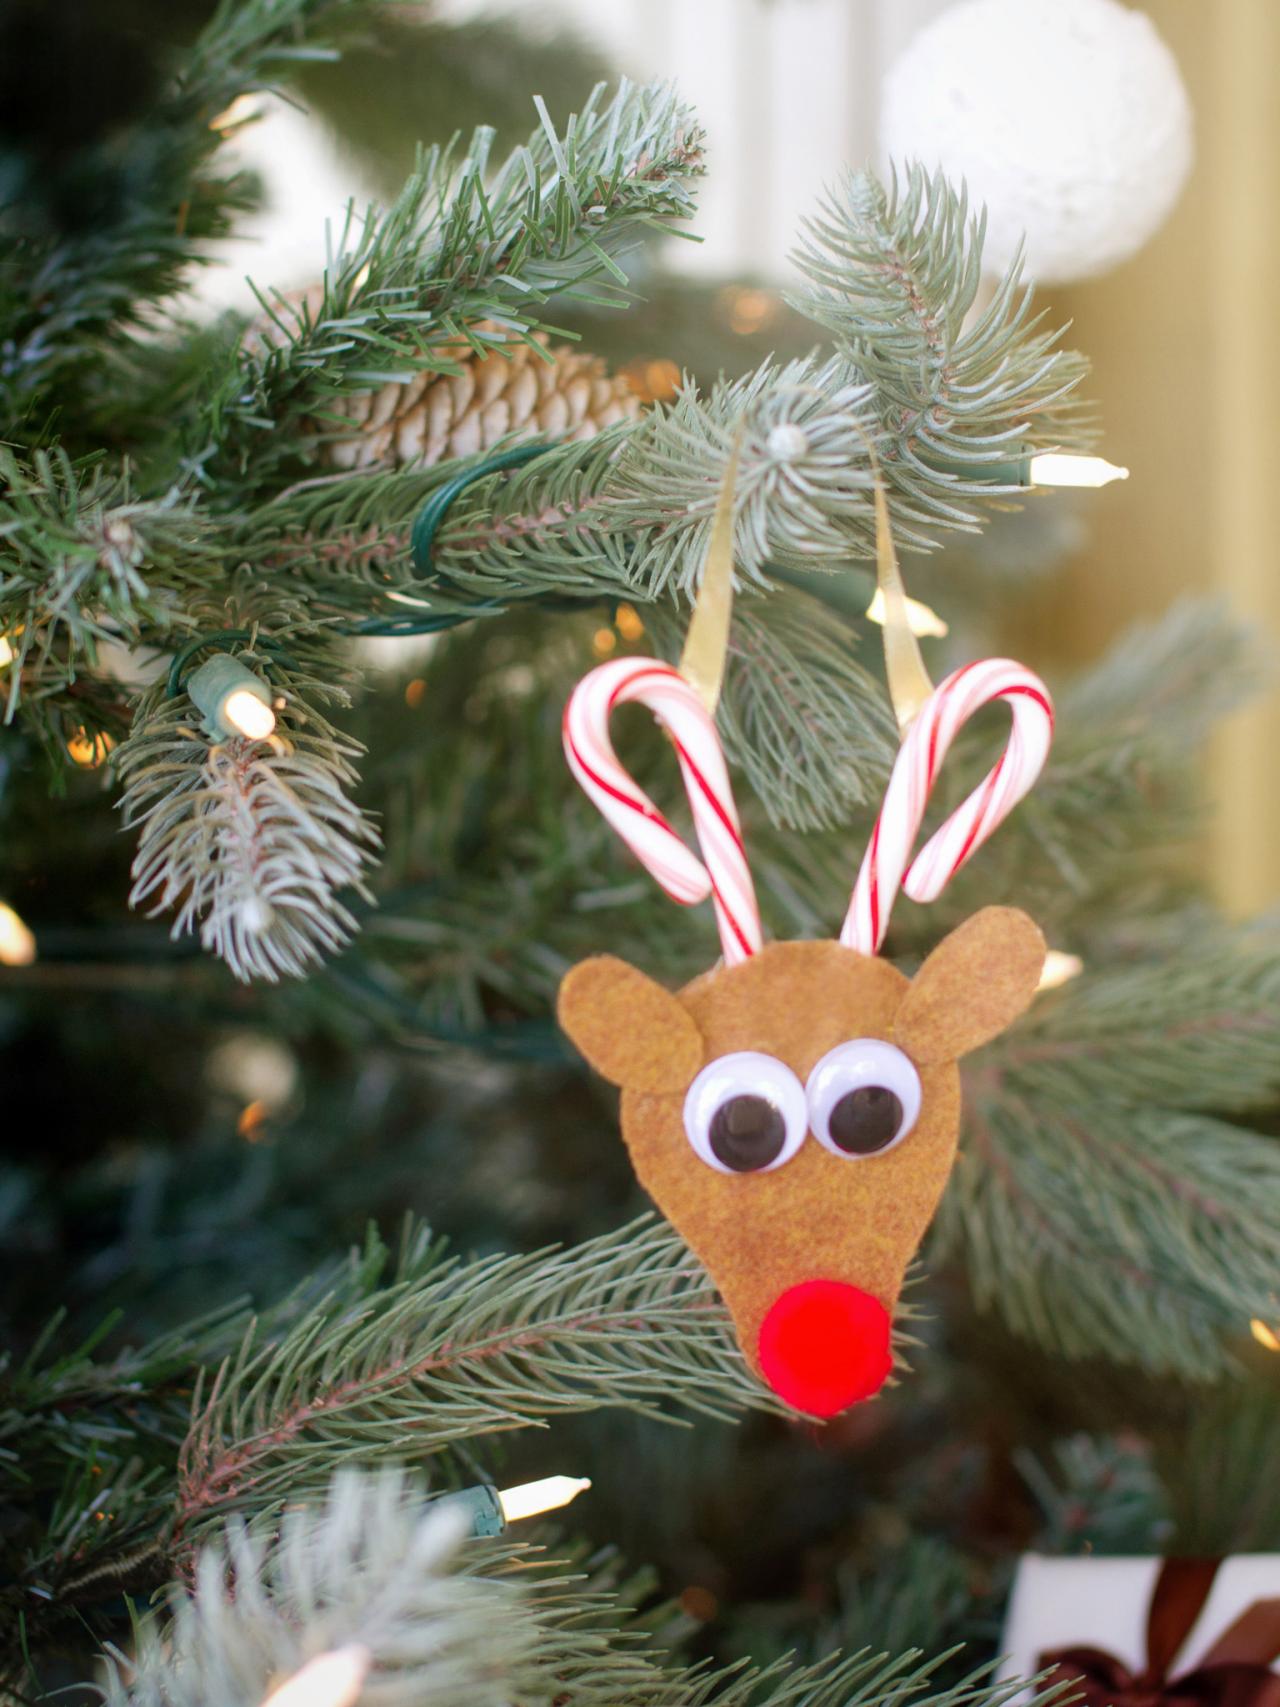 How to Make a Candy Cane Reindeer Ornament | HGTV